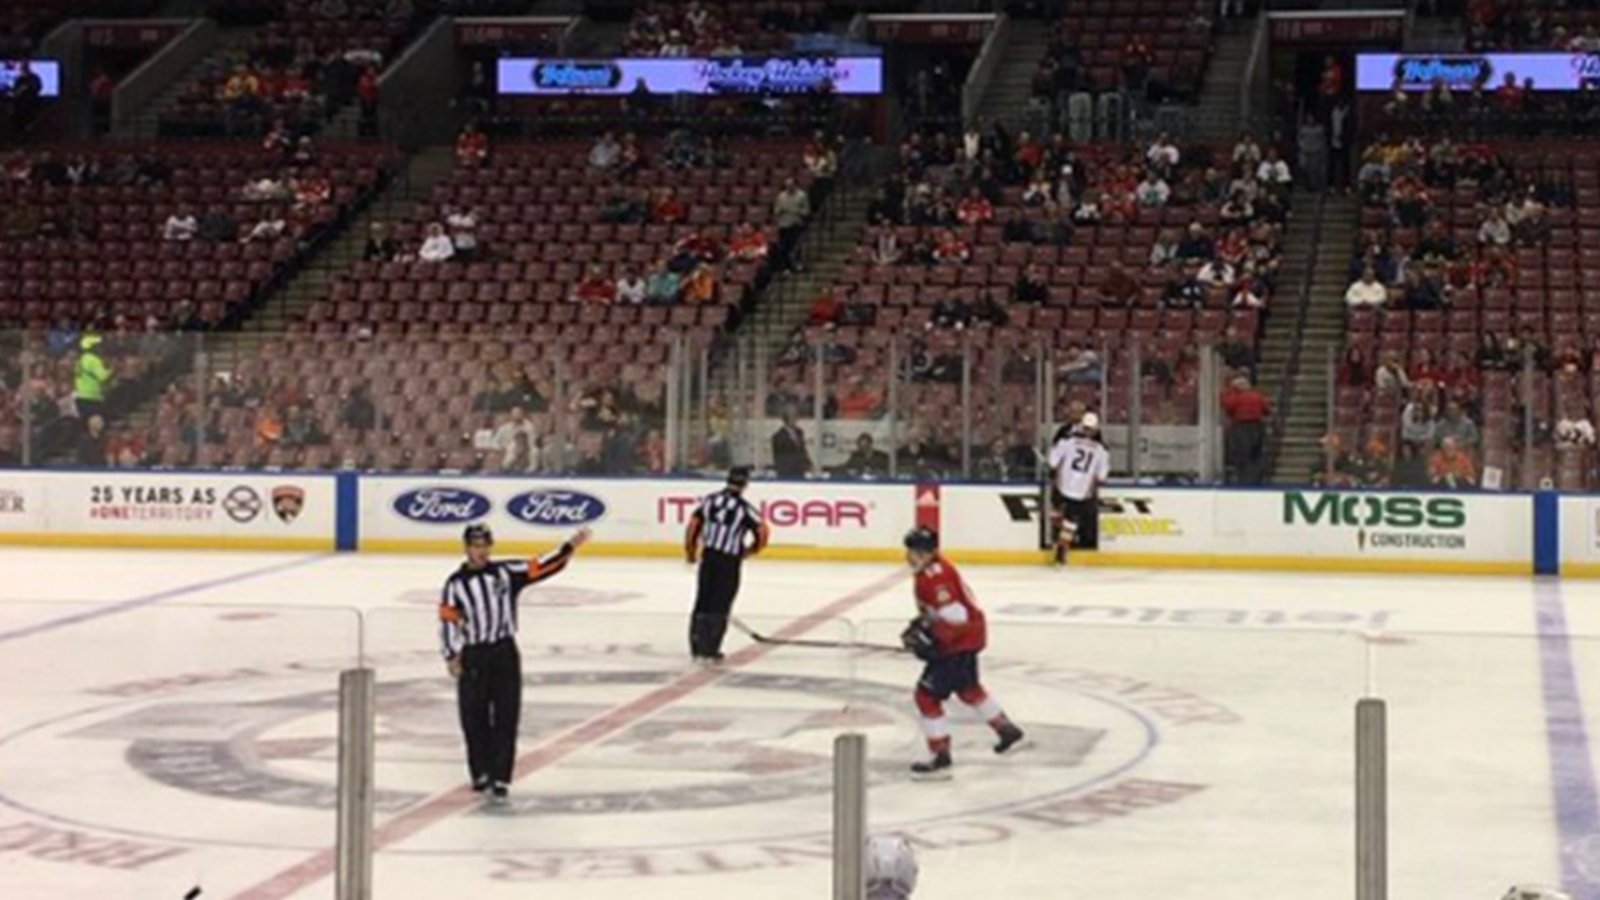 Panthers set embarrassing new low in attendance for game against Ducks